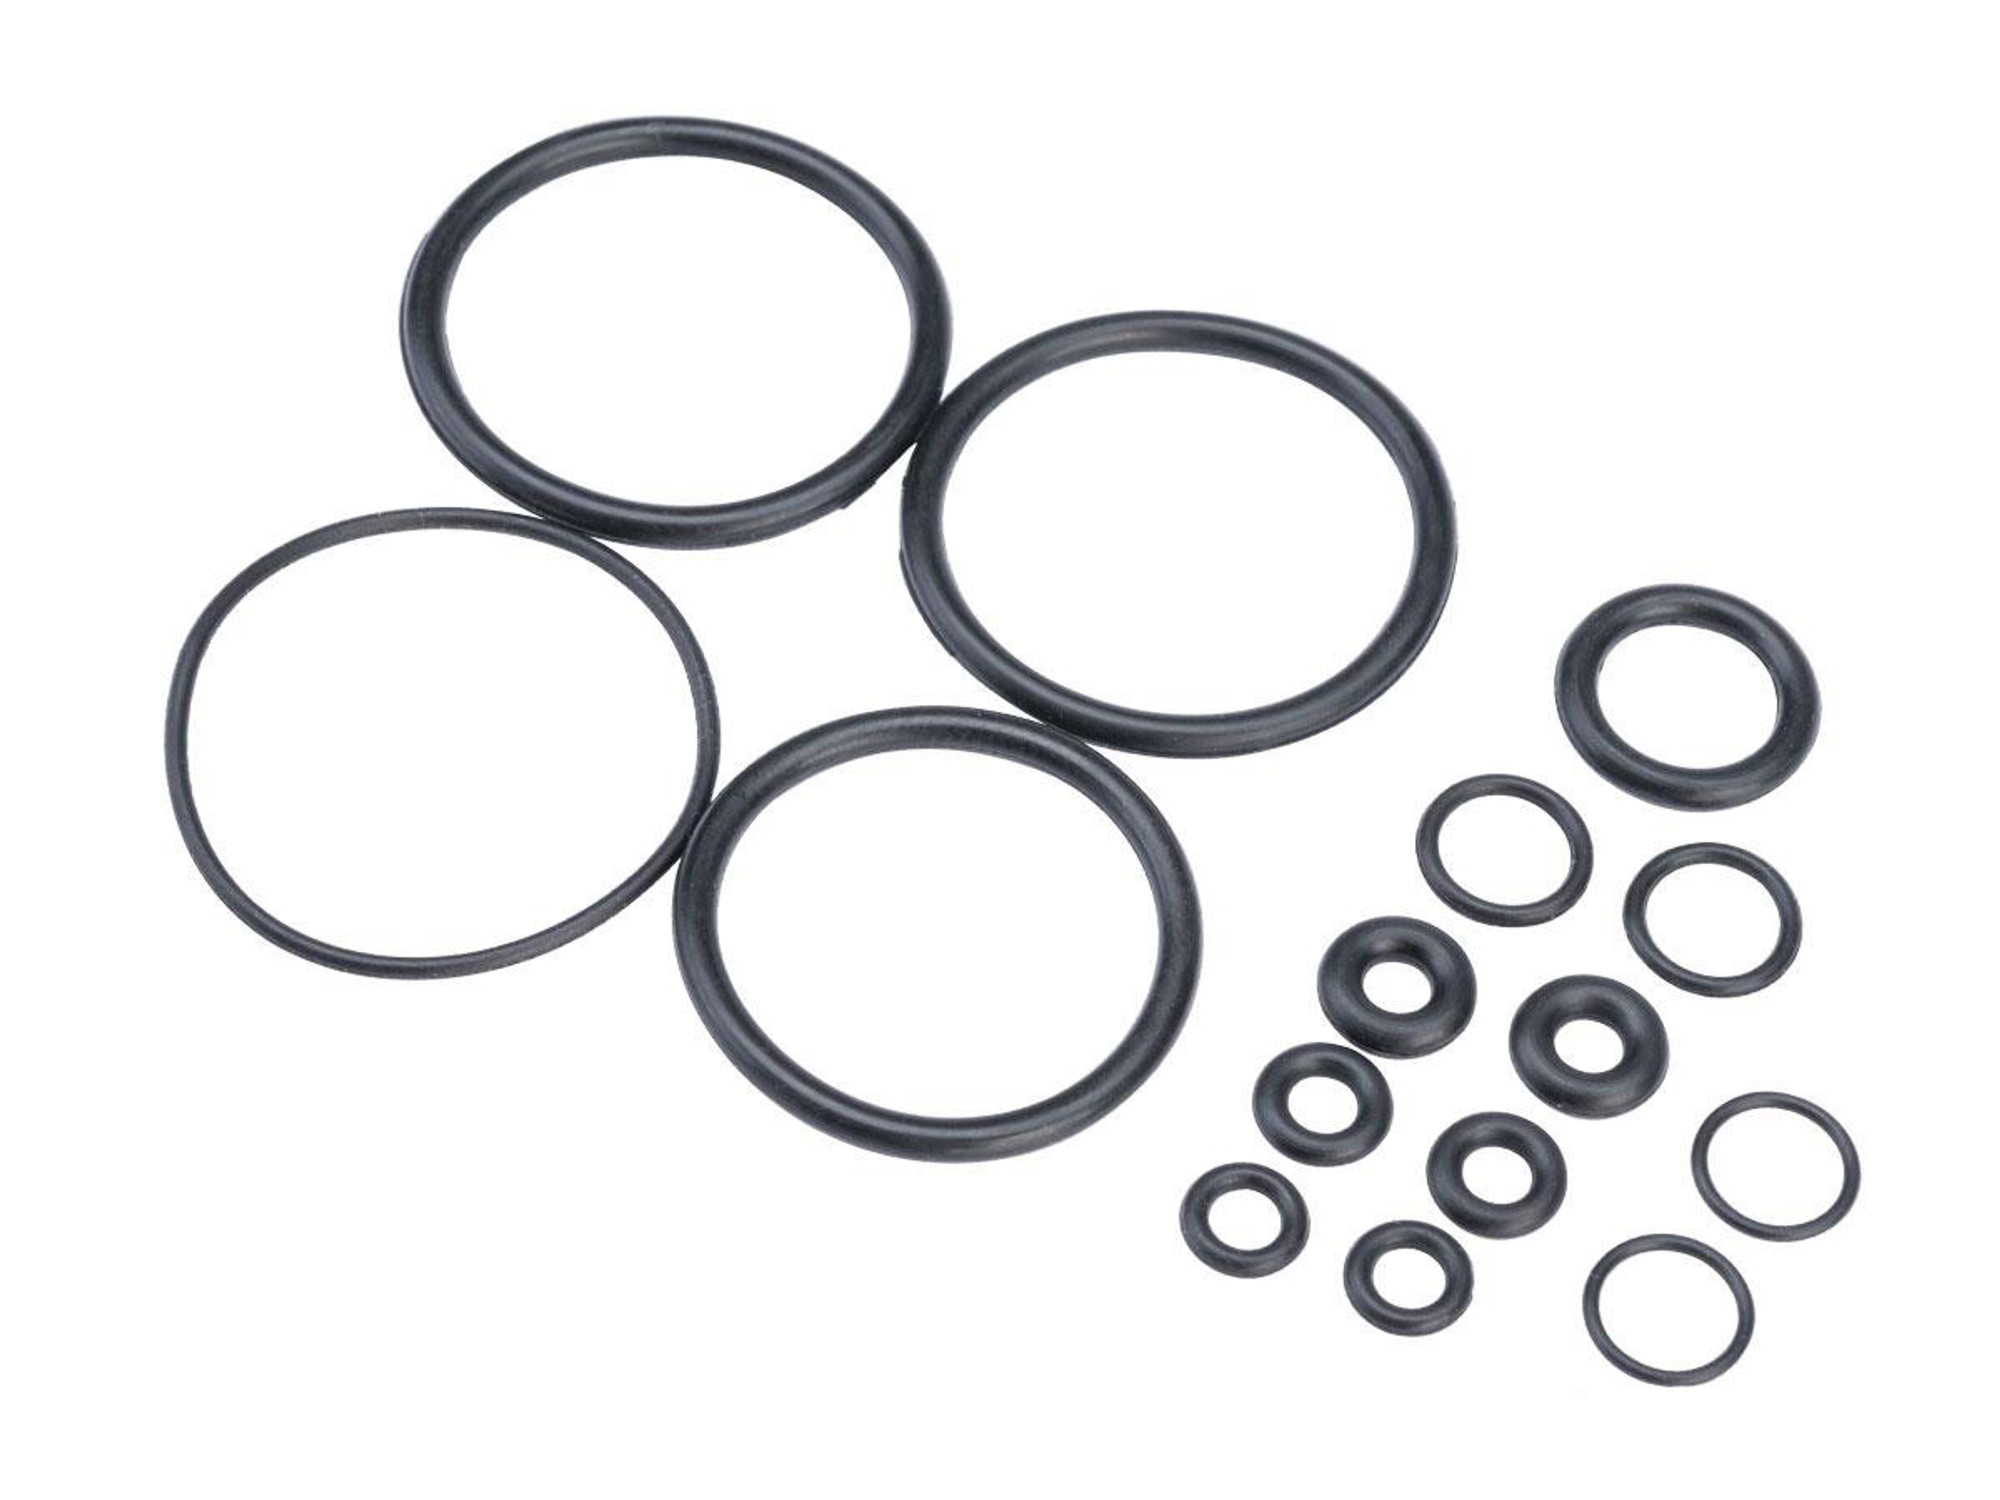 Silverback Airsoft Replacement O-Ring Set for Desert Tech SRS-A1/A2 Airsoft Sniper Rifles